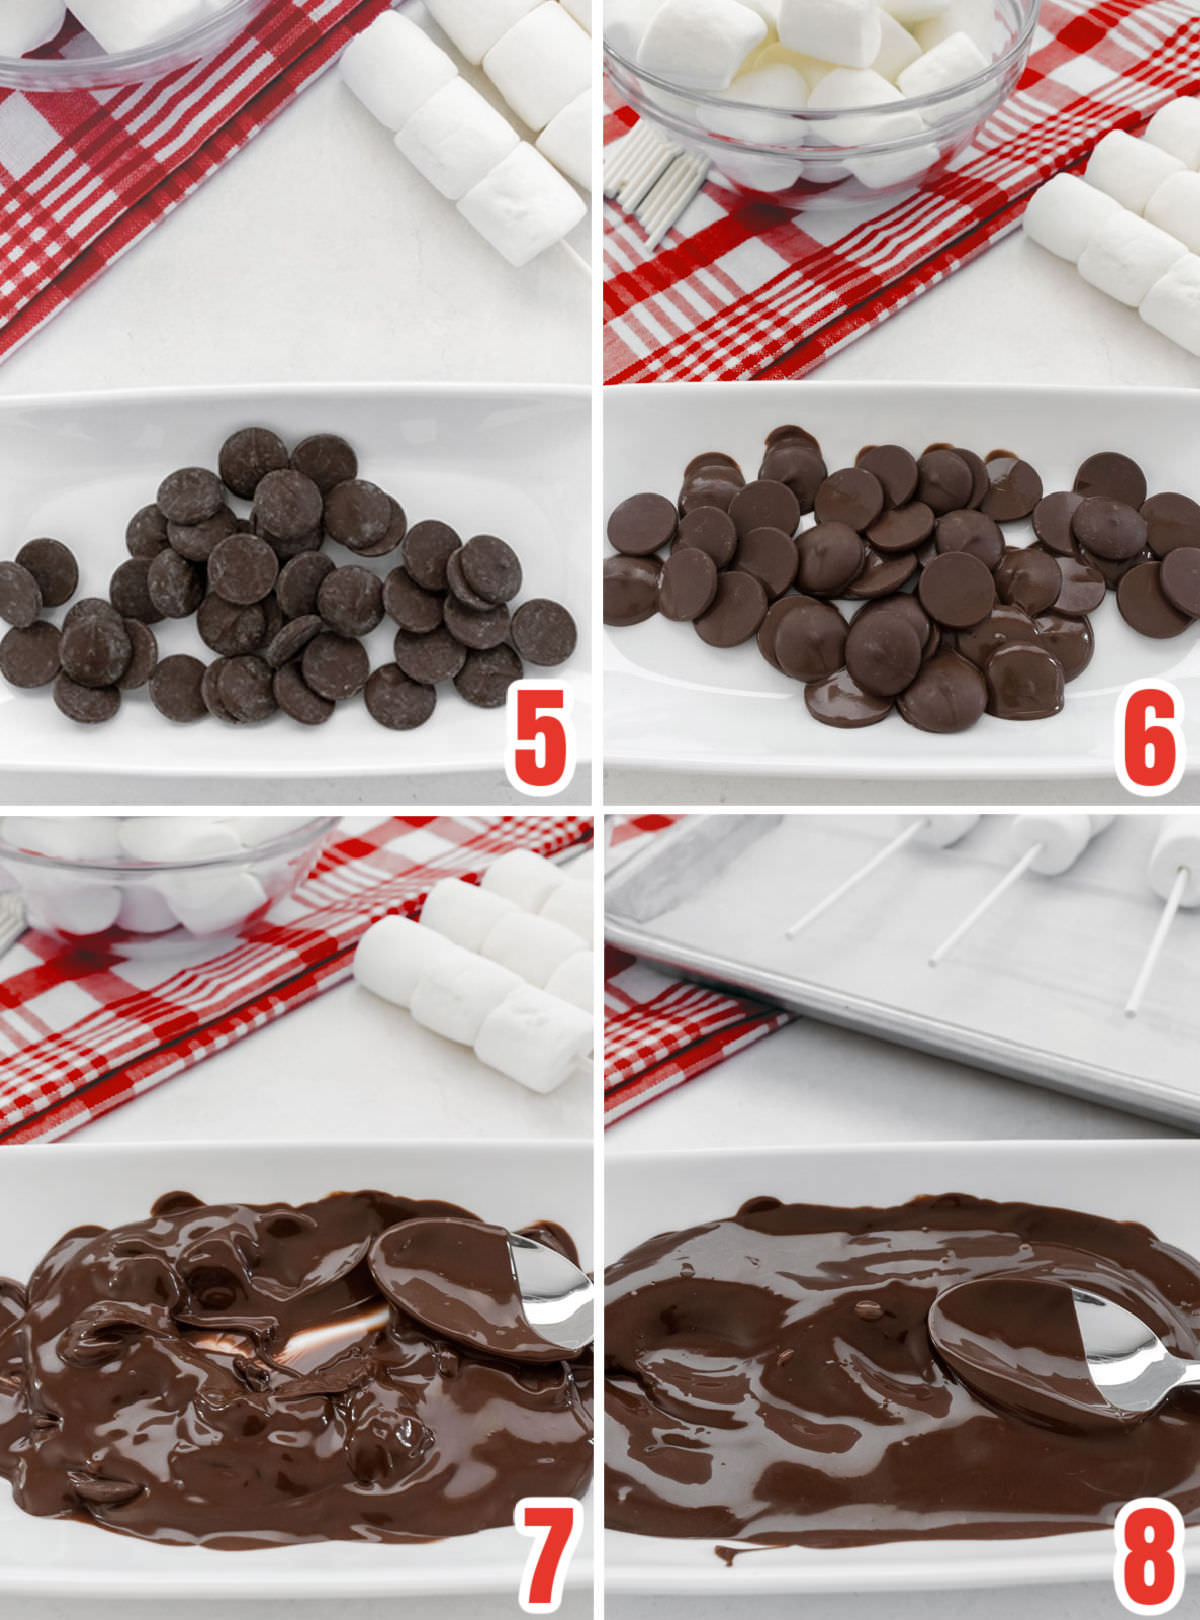 Collage image showing how to melt the chocolate melting wafers in the microwave.